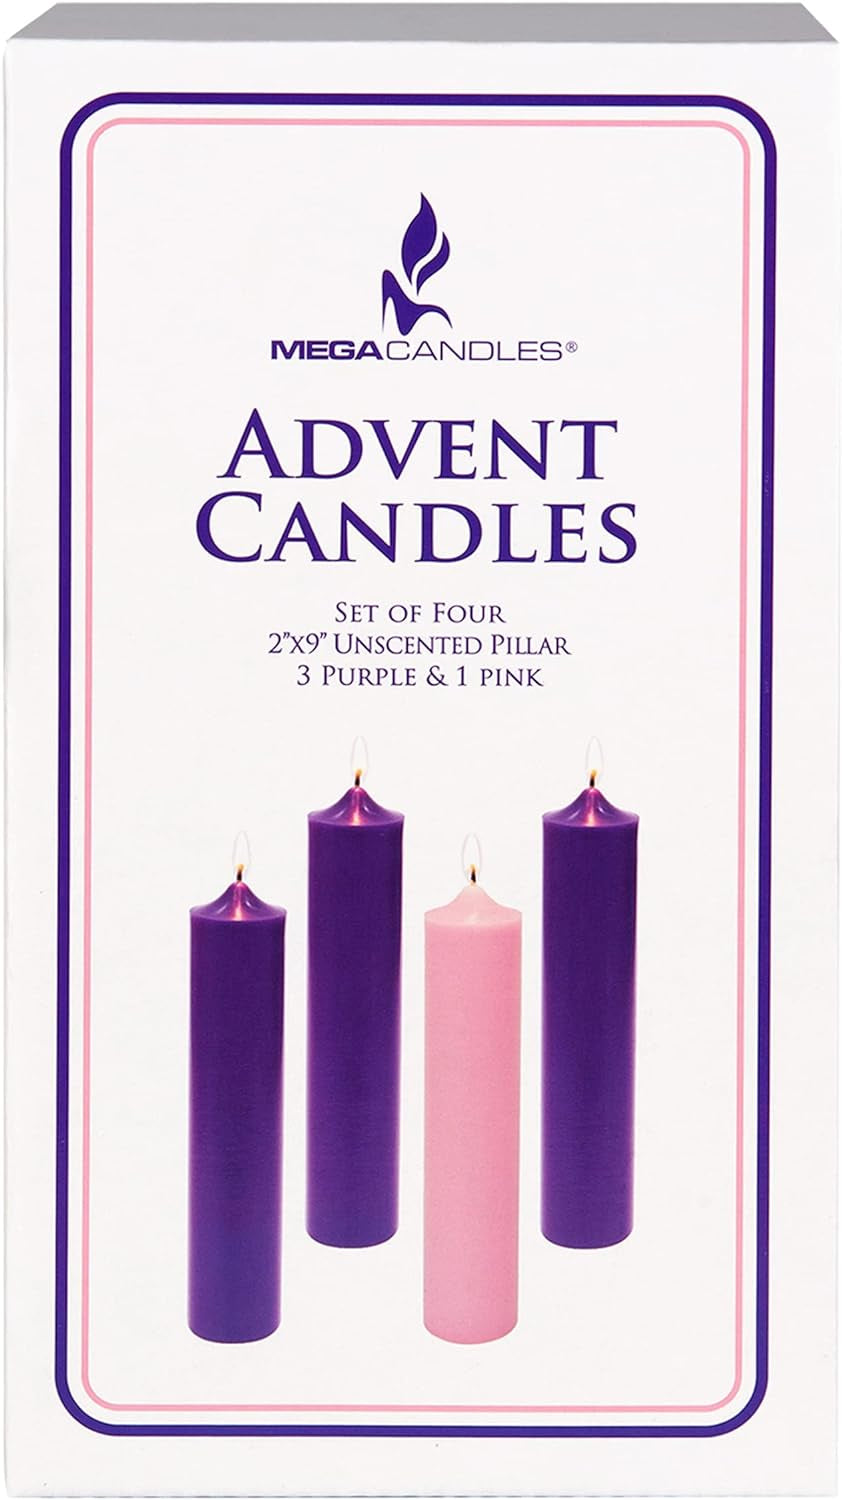 Professional Title: "Set of 4 Unscented Advent Dome Top Pillar Candles - Hand Poured Wax, 2 Inch X 9 Inch - Ideal for Holidays, Church, Decorations, Devotional, Celebration, Party, and More"